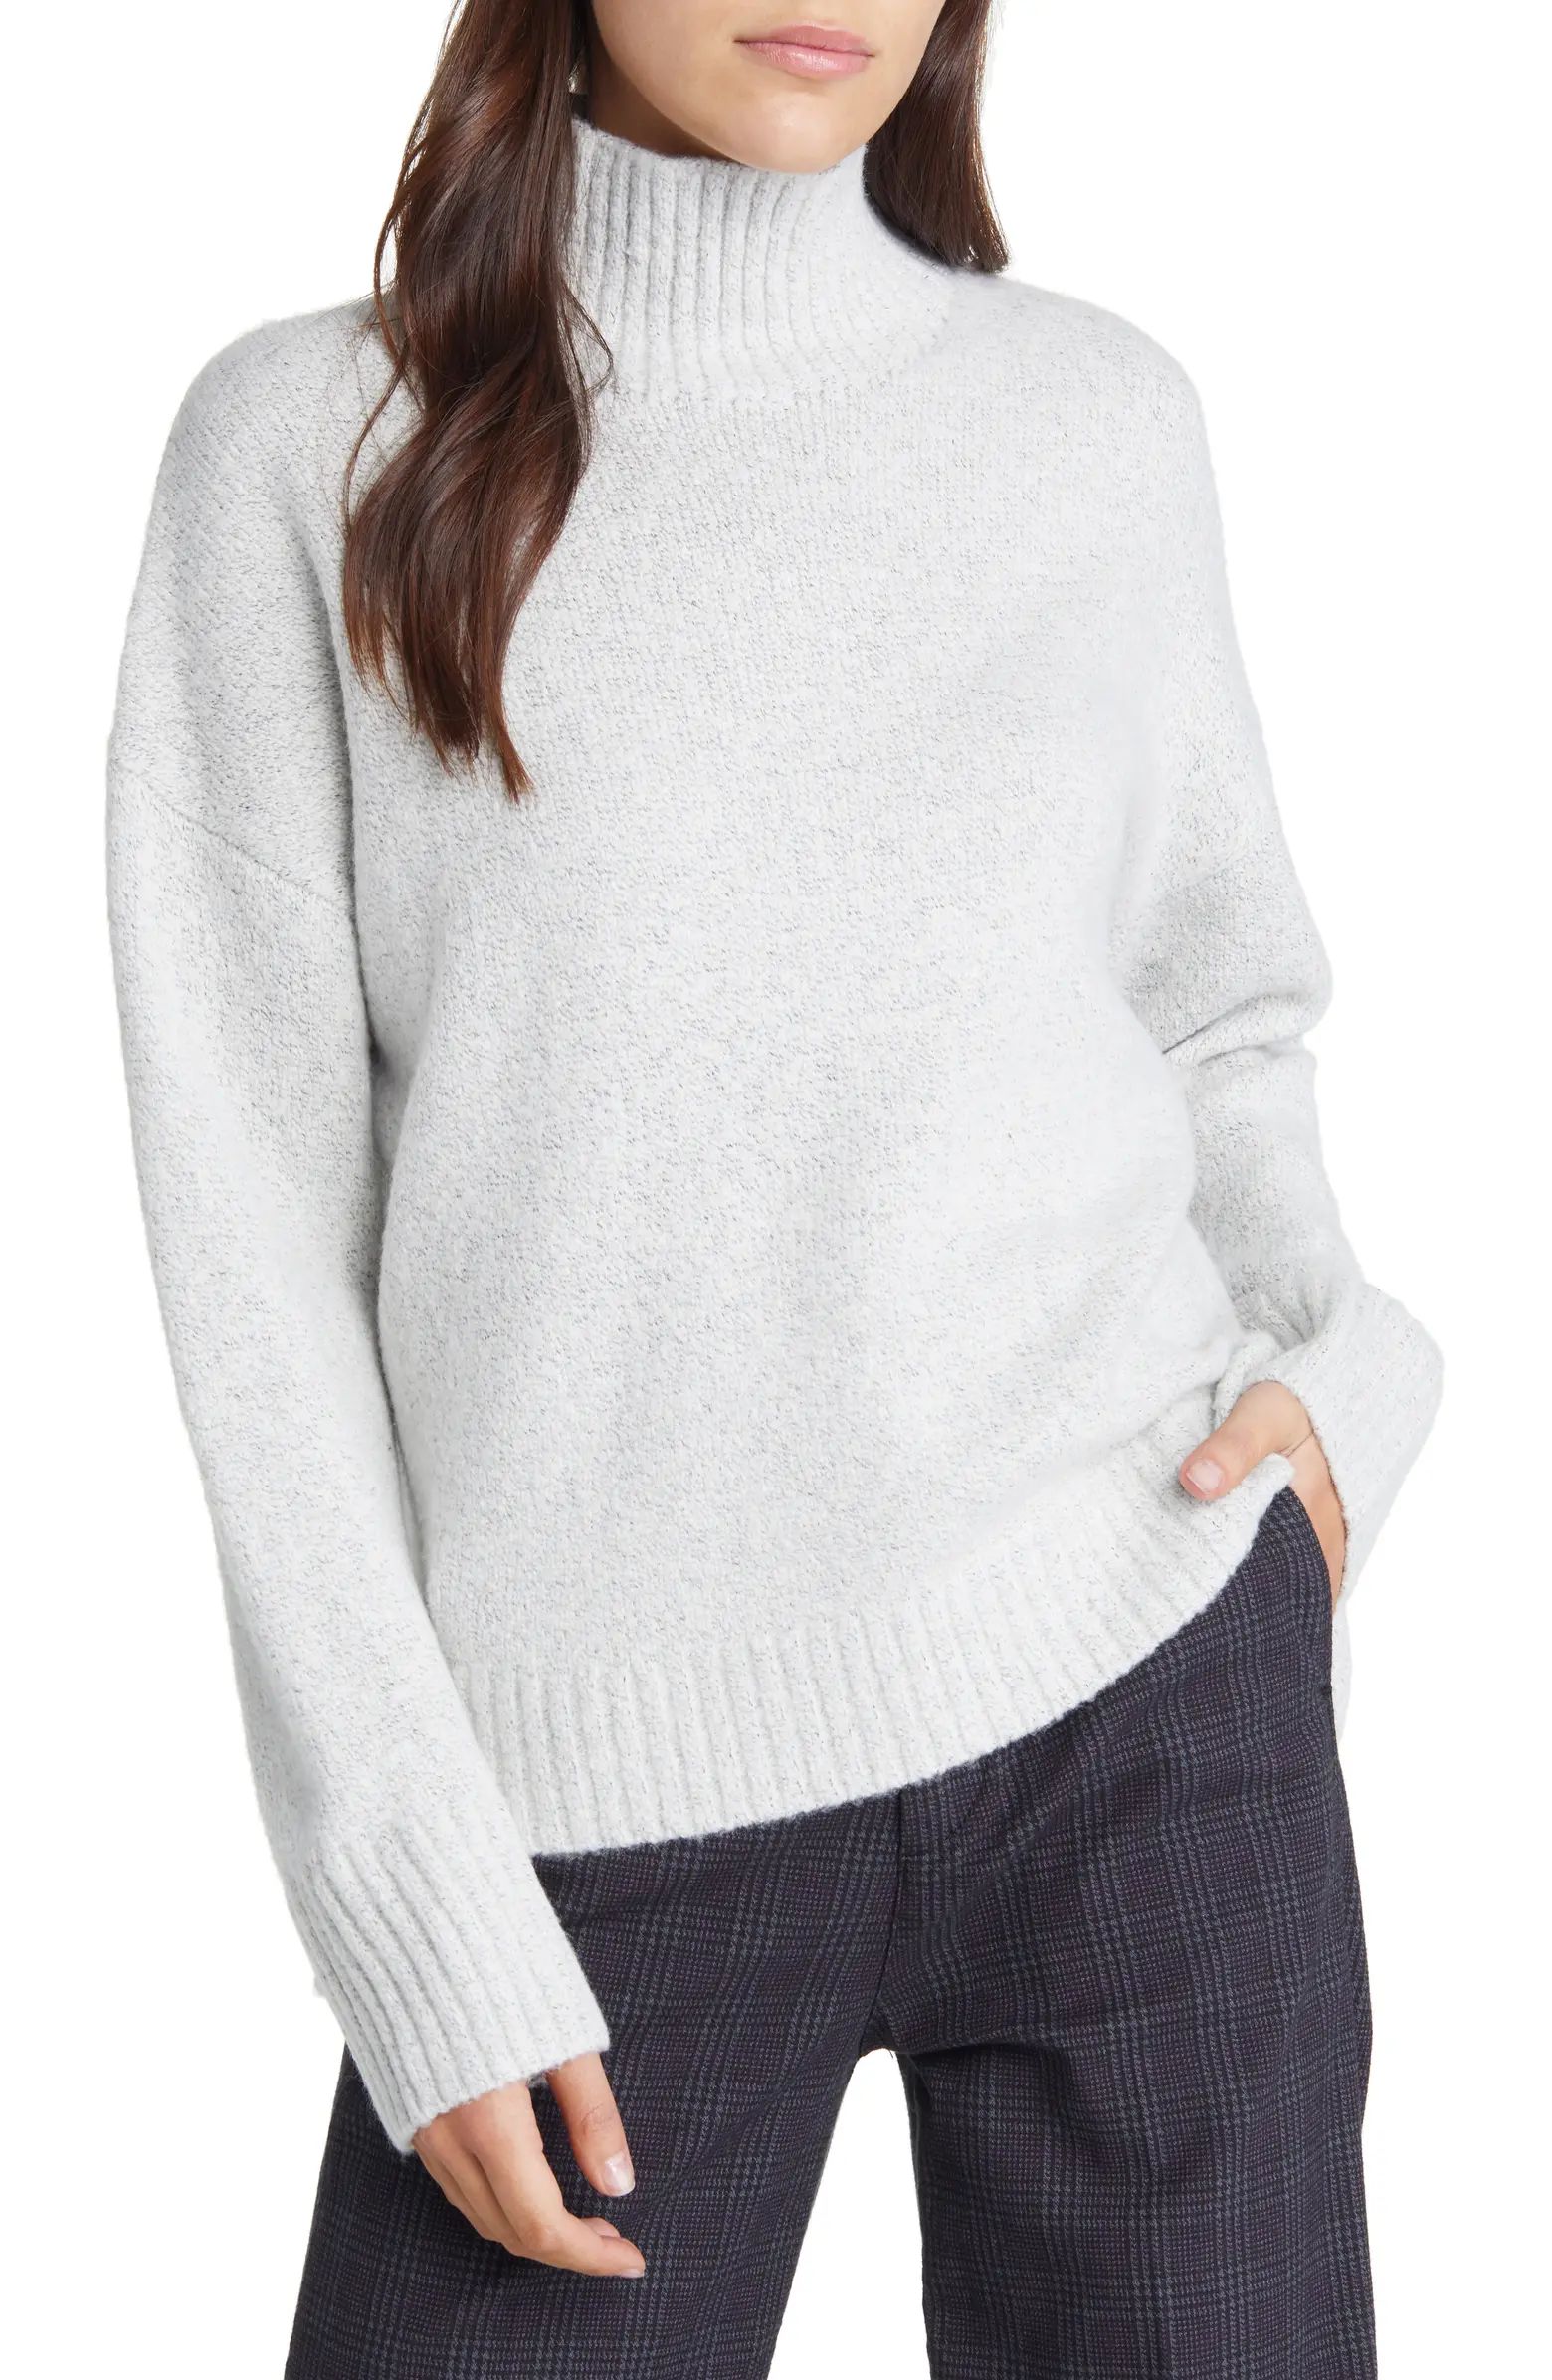 Women's Marled Mock Neck High-Low Tunic Sweater | Nordstrom